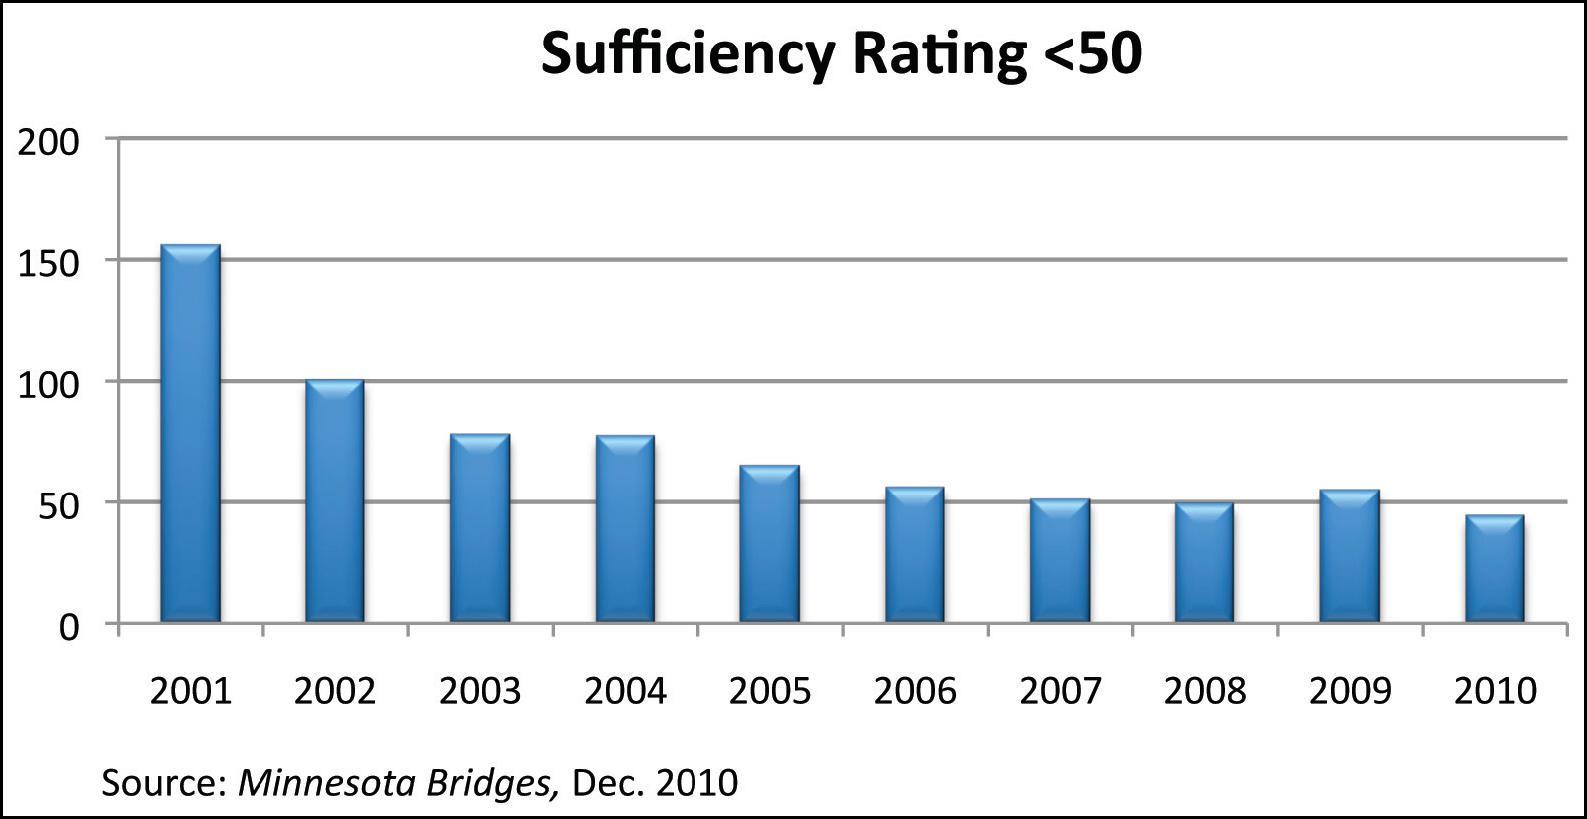 Figure 44 illustrates the number of bridges on the Minnesota trunk highway system with a sufficiency rating less than 50.  In 2001 the number of bridges with a sufficiency rating less than 50 was more than 150 and that number steadily declined to fewer than 50 by 2010.